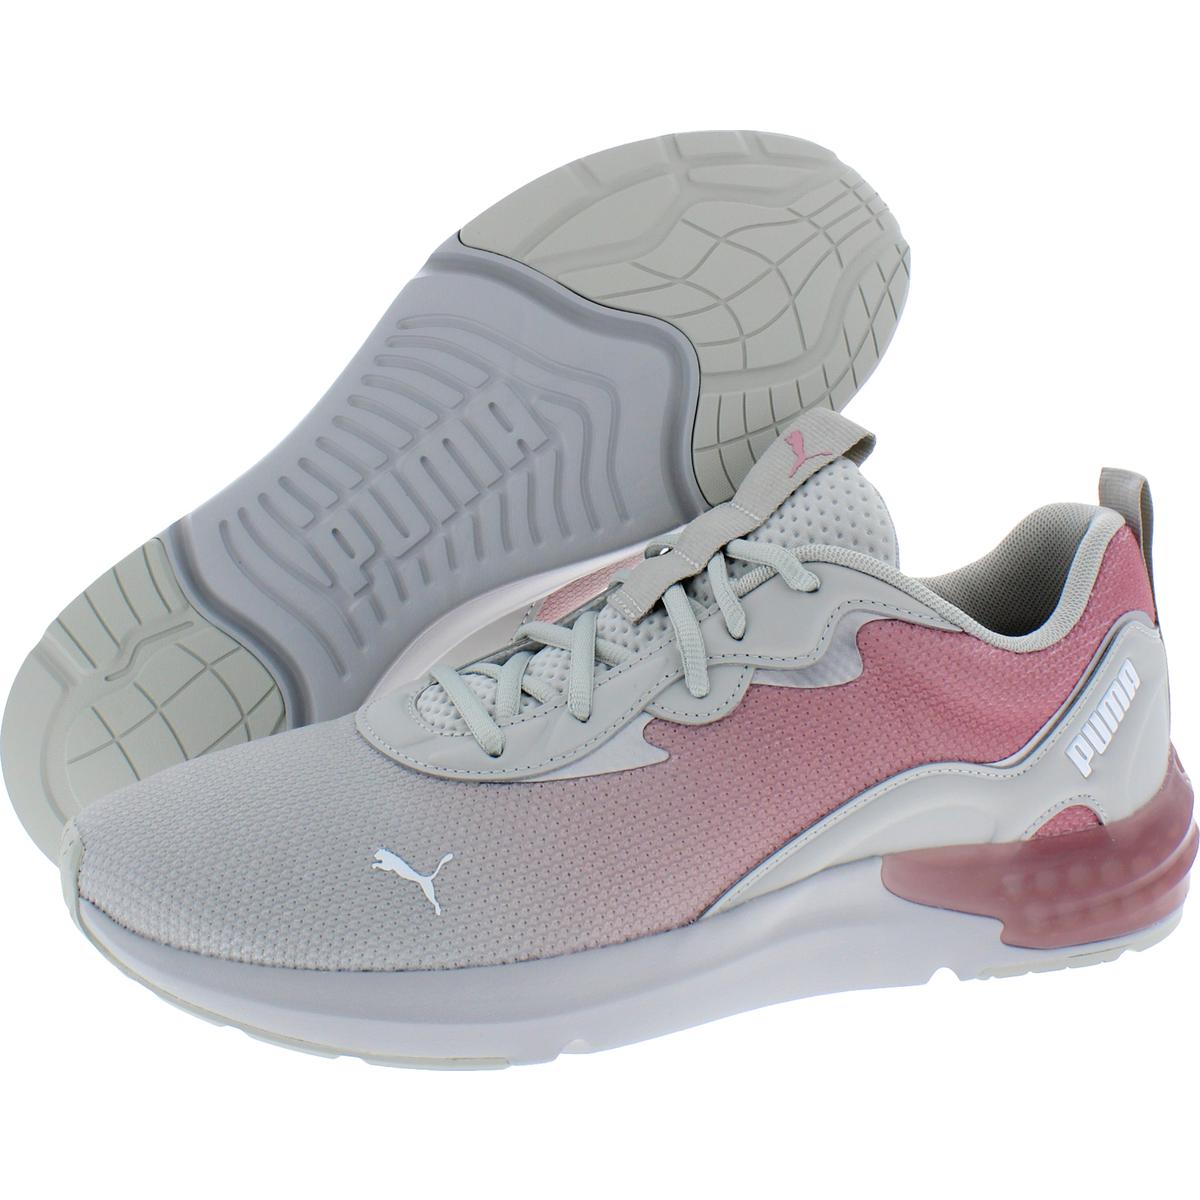 Puma Womens Cell Initiate Fade Performance Running Shoes Sneakers BHFO ...